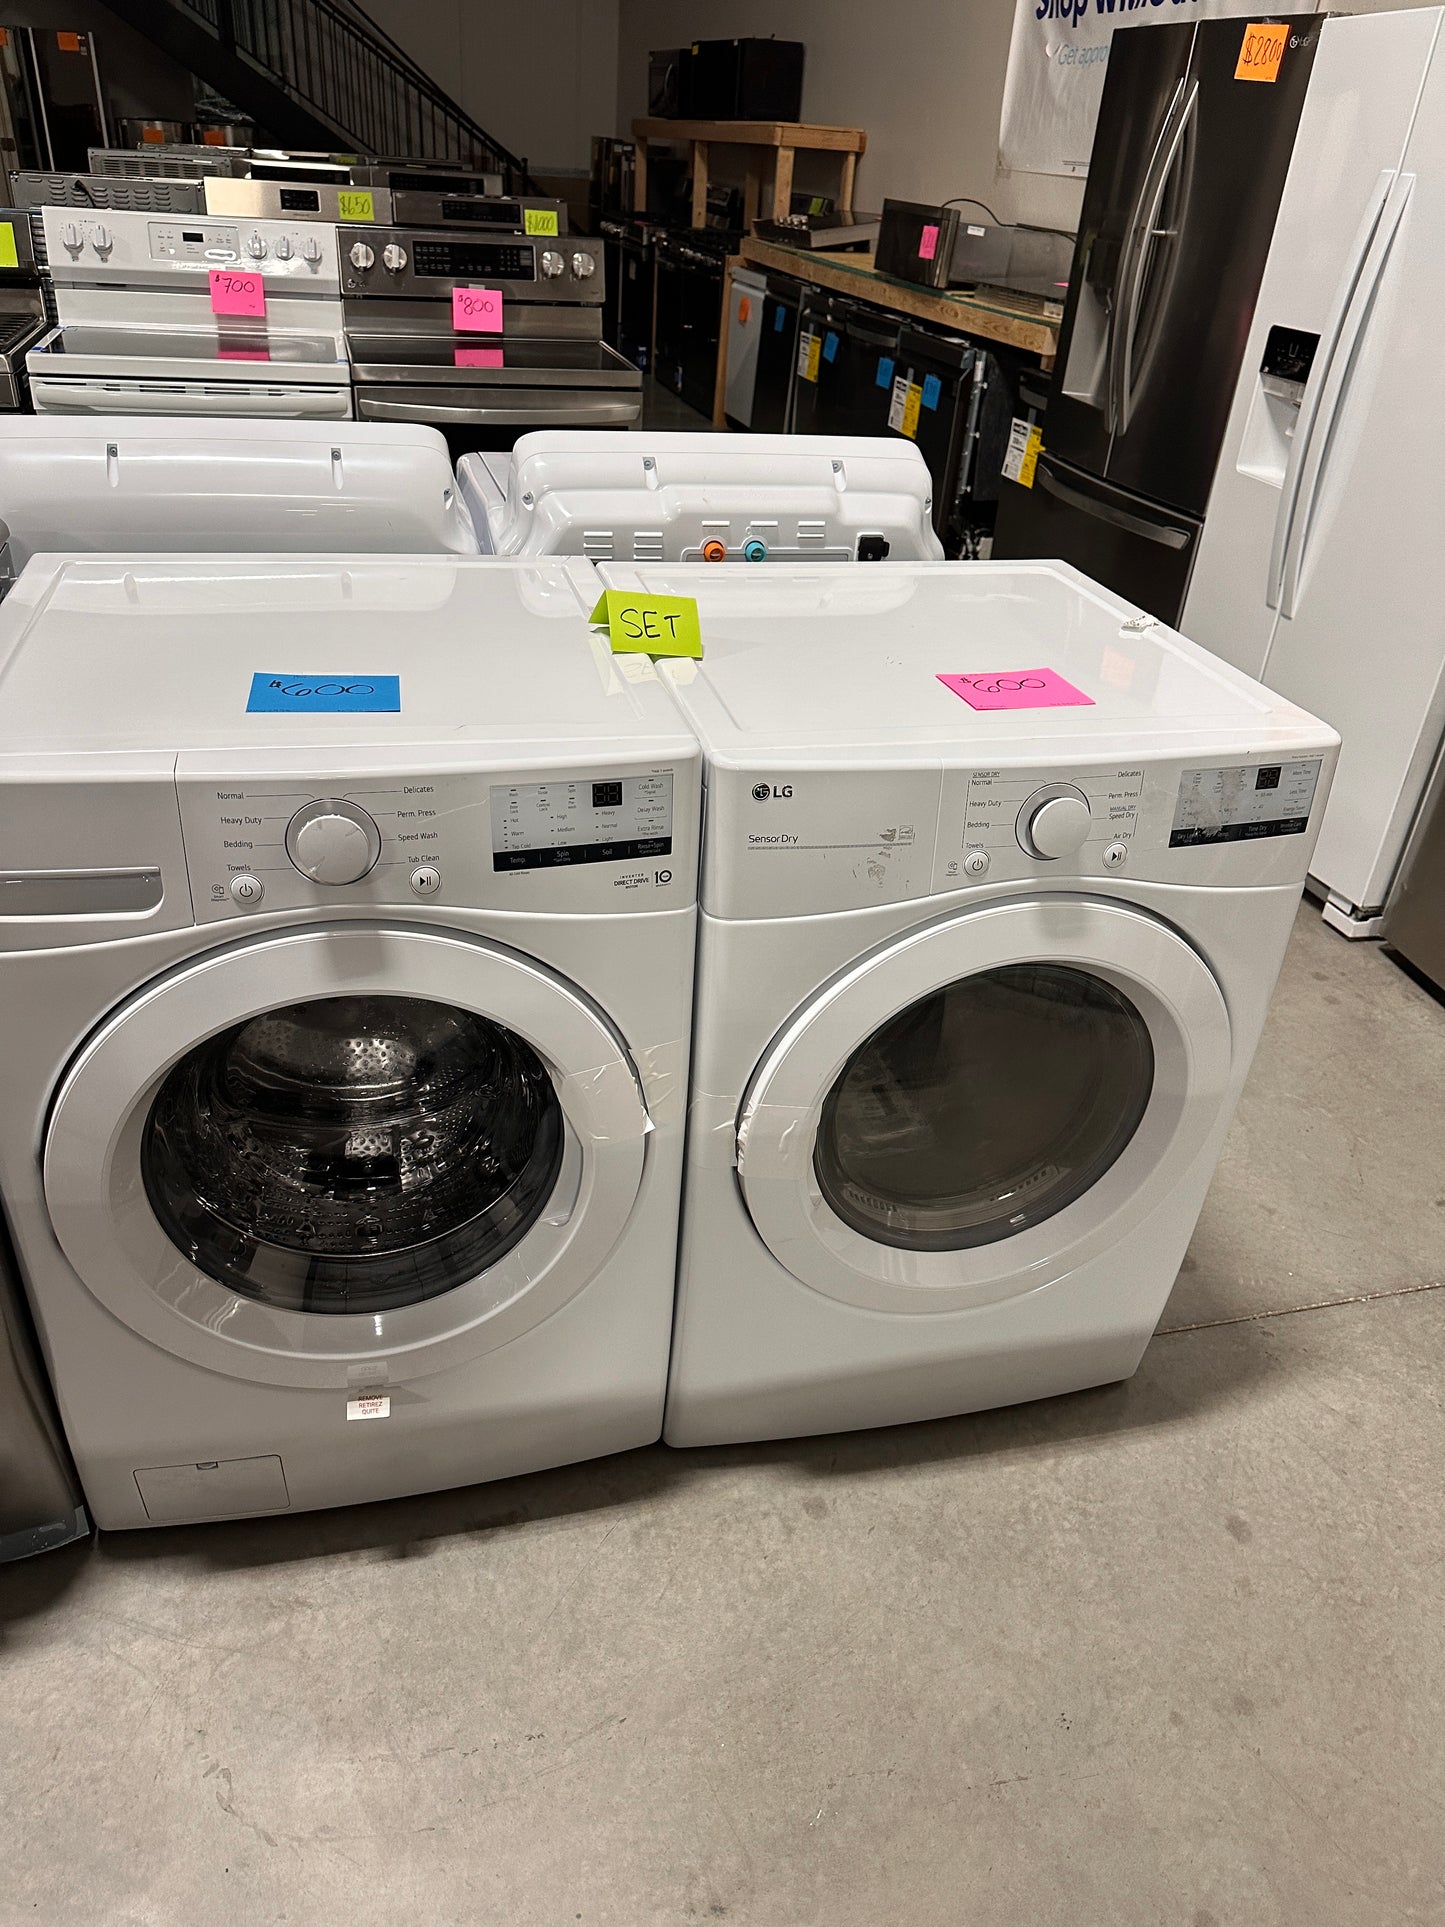 BRAND NEW STACKABLE LAUNDRY SET with ELECTRIC DRYER - DRY11416 WAS12798